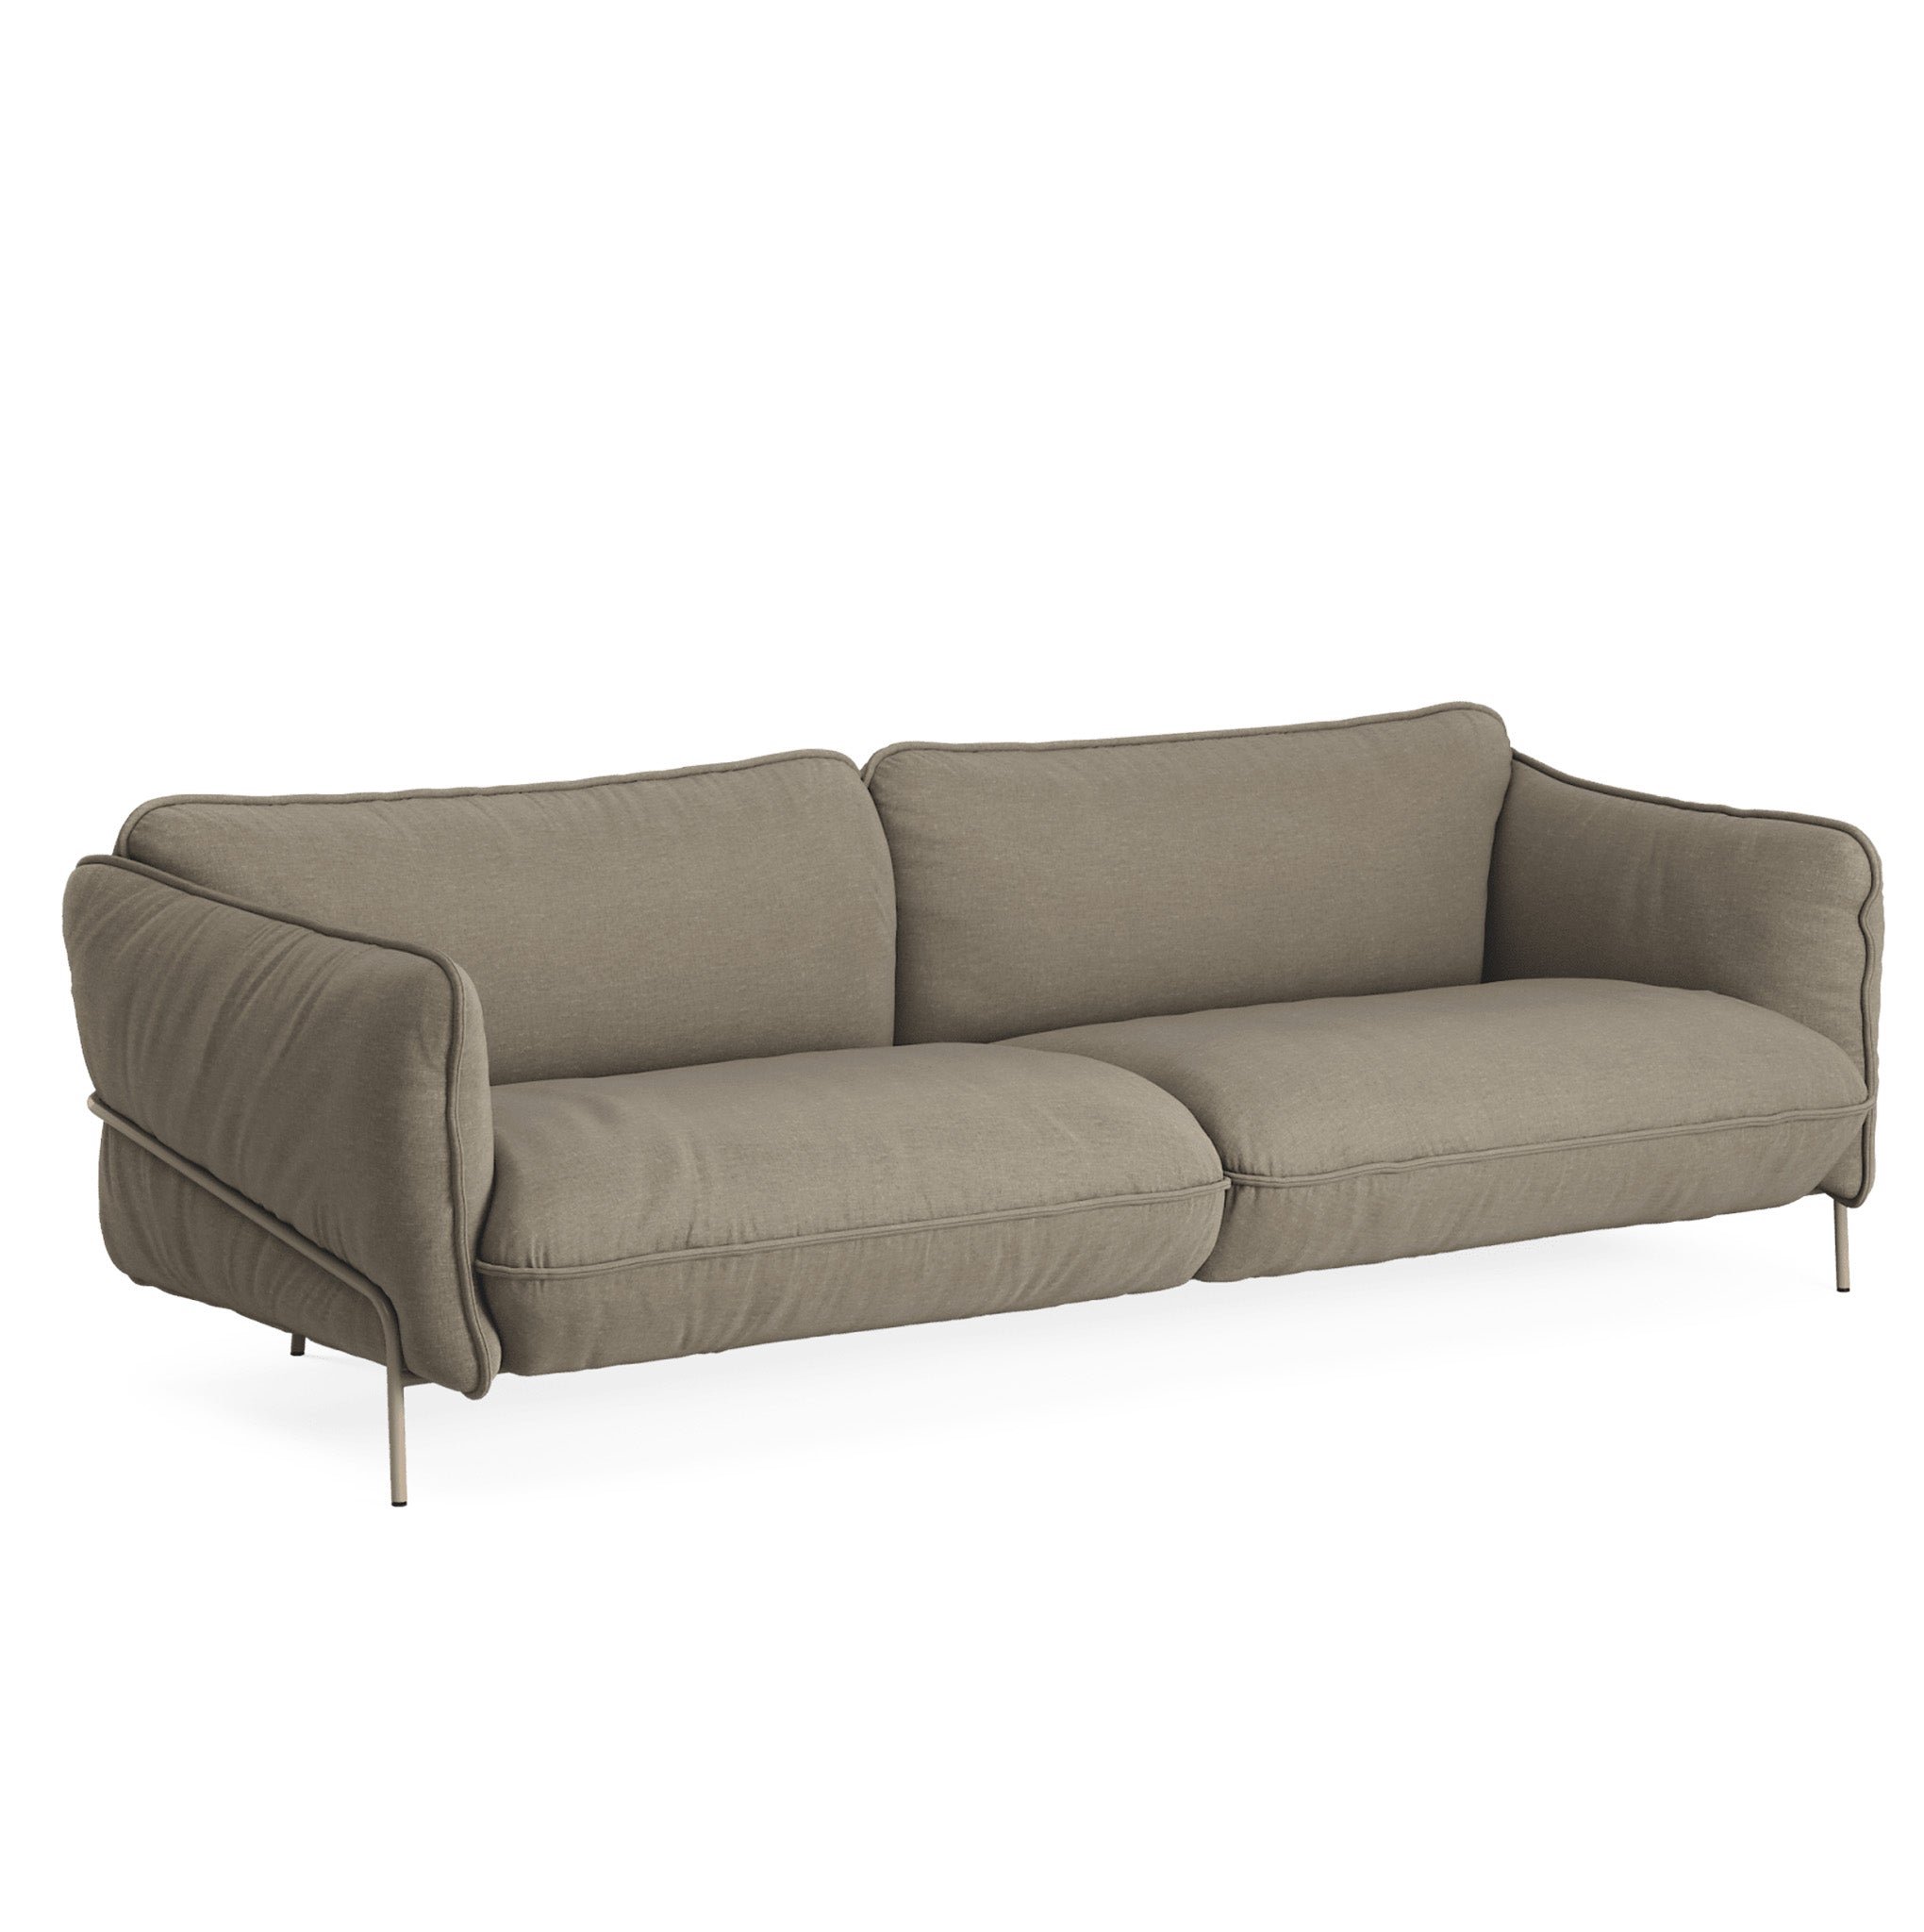 Continental Sofa by Swedese